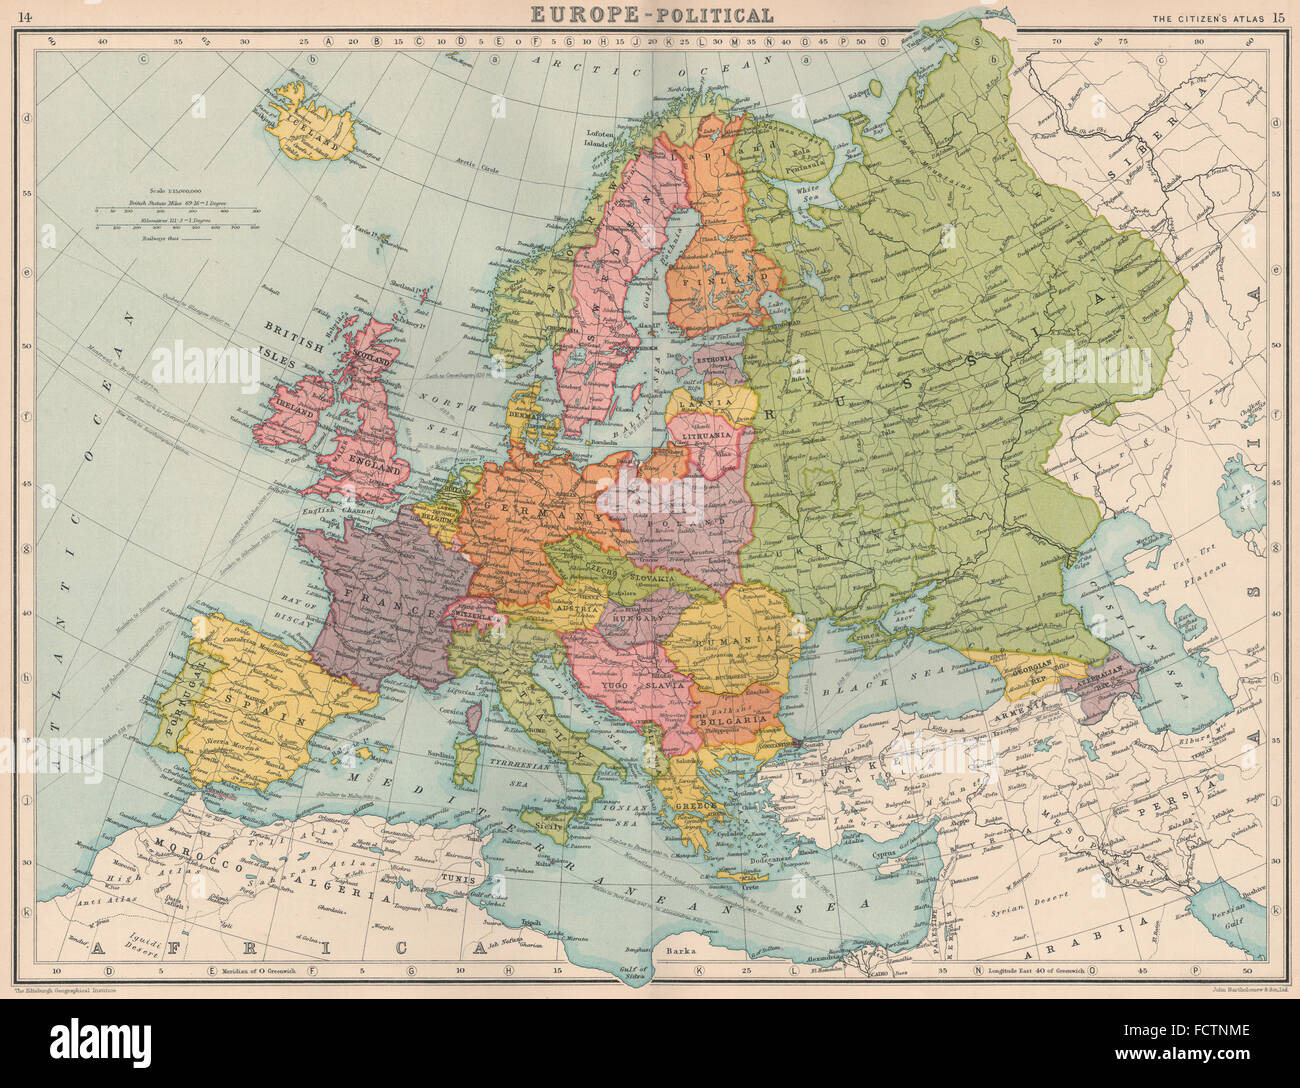 EUROPE-POLITICAL: Shows Saar under League of Nations administration, 1924 map Stock Photo